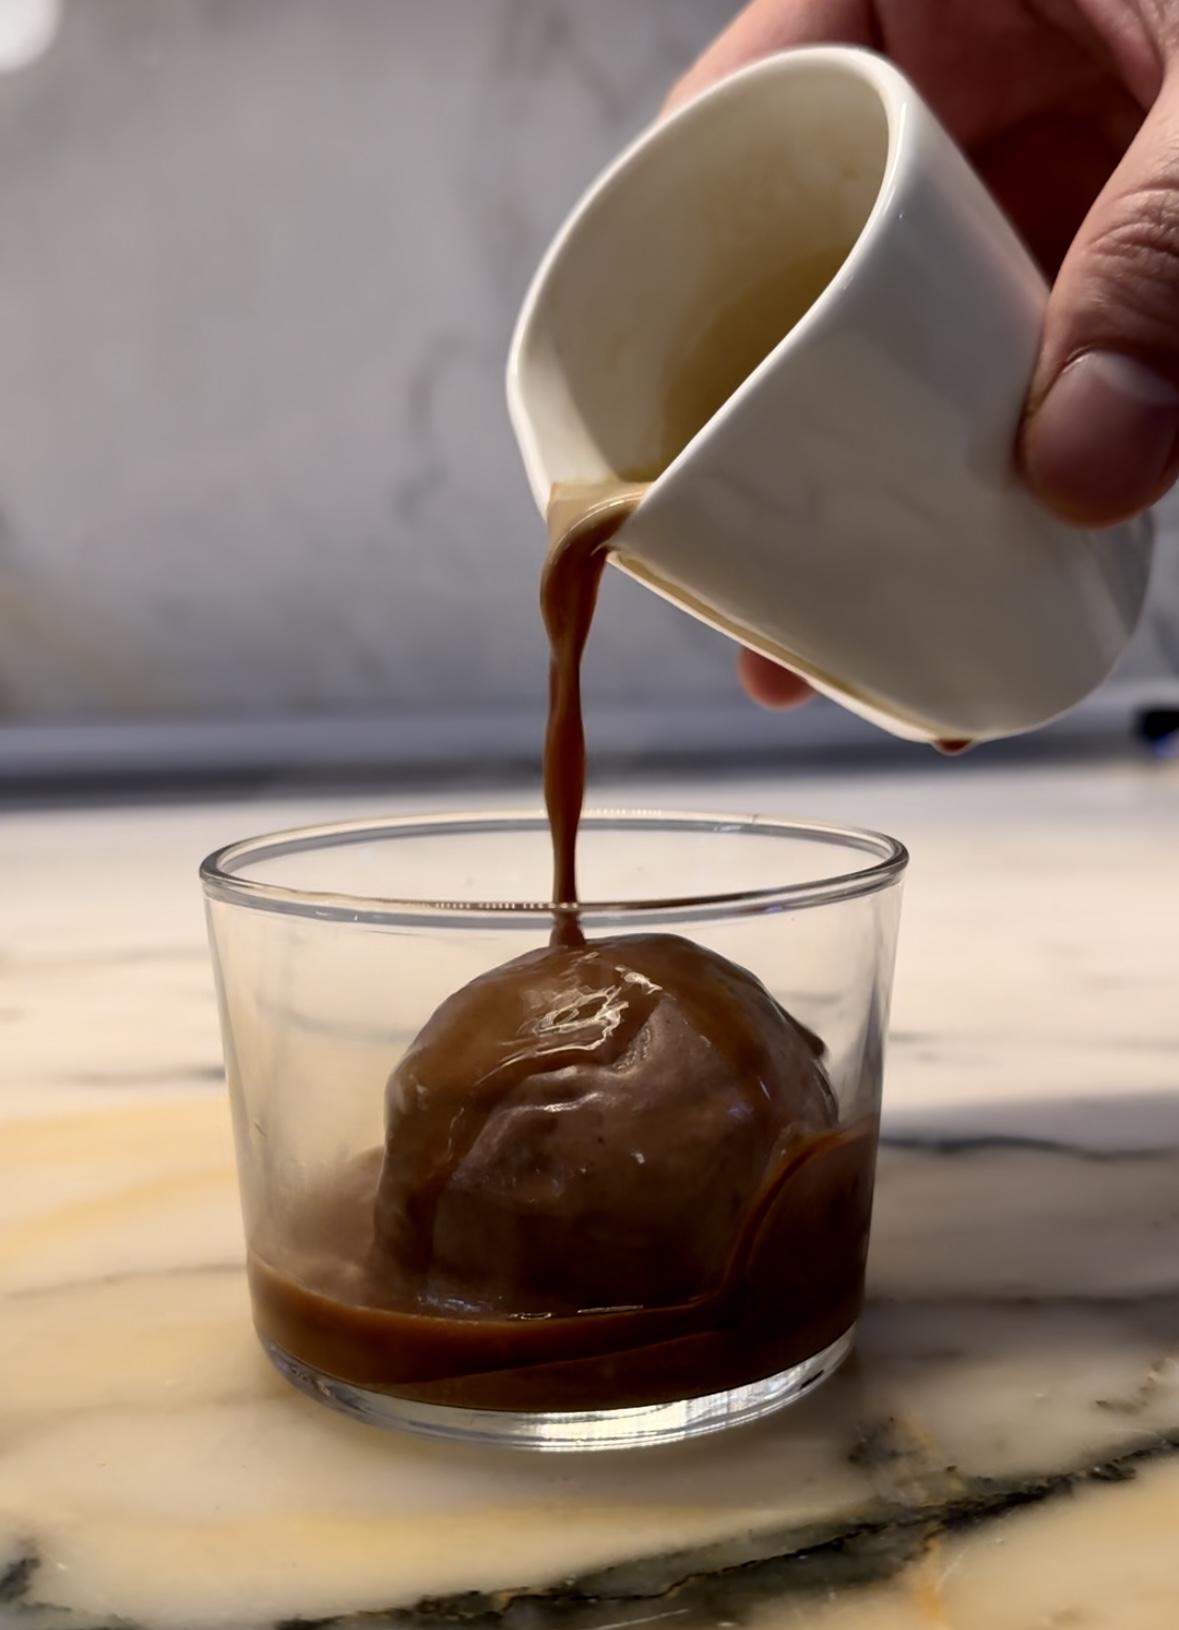 A small carafe of brown liquid is poured onto a scoop of chocolate ice cream within a glass bowl.